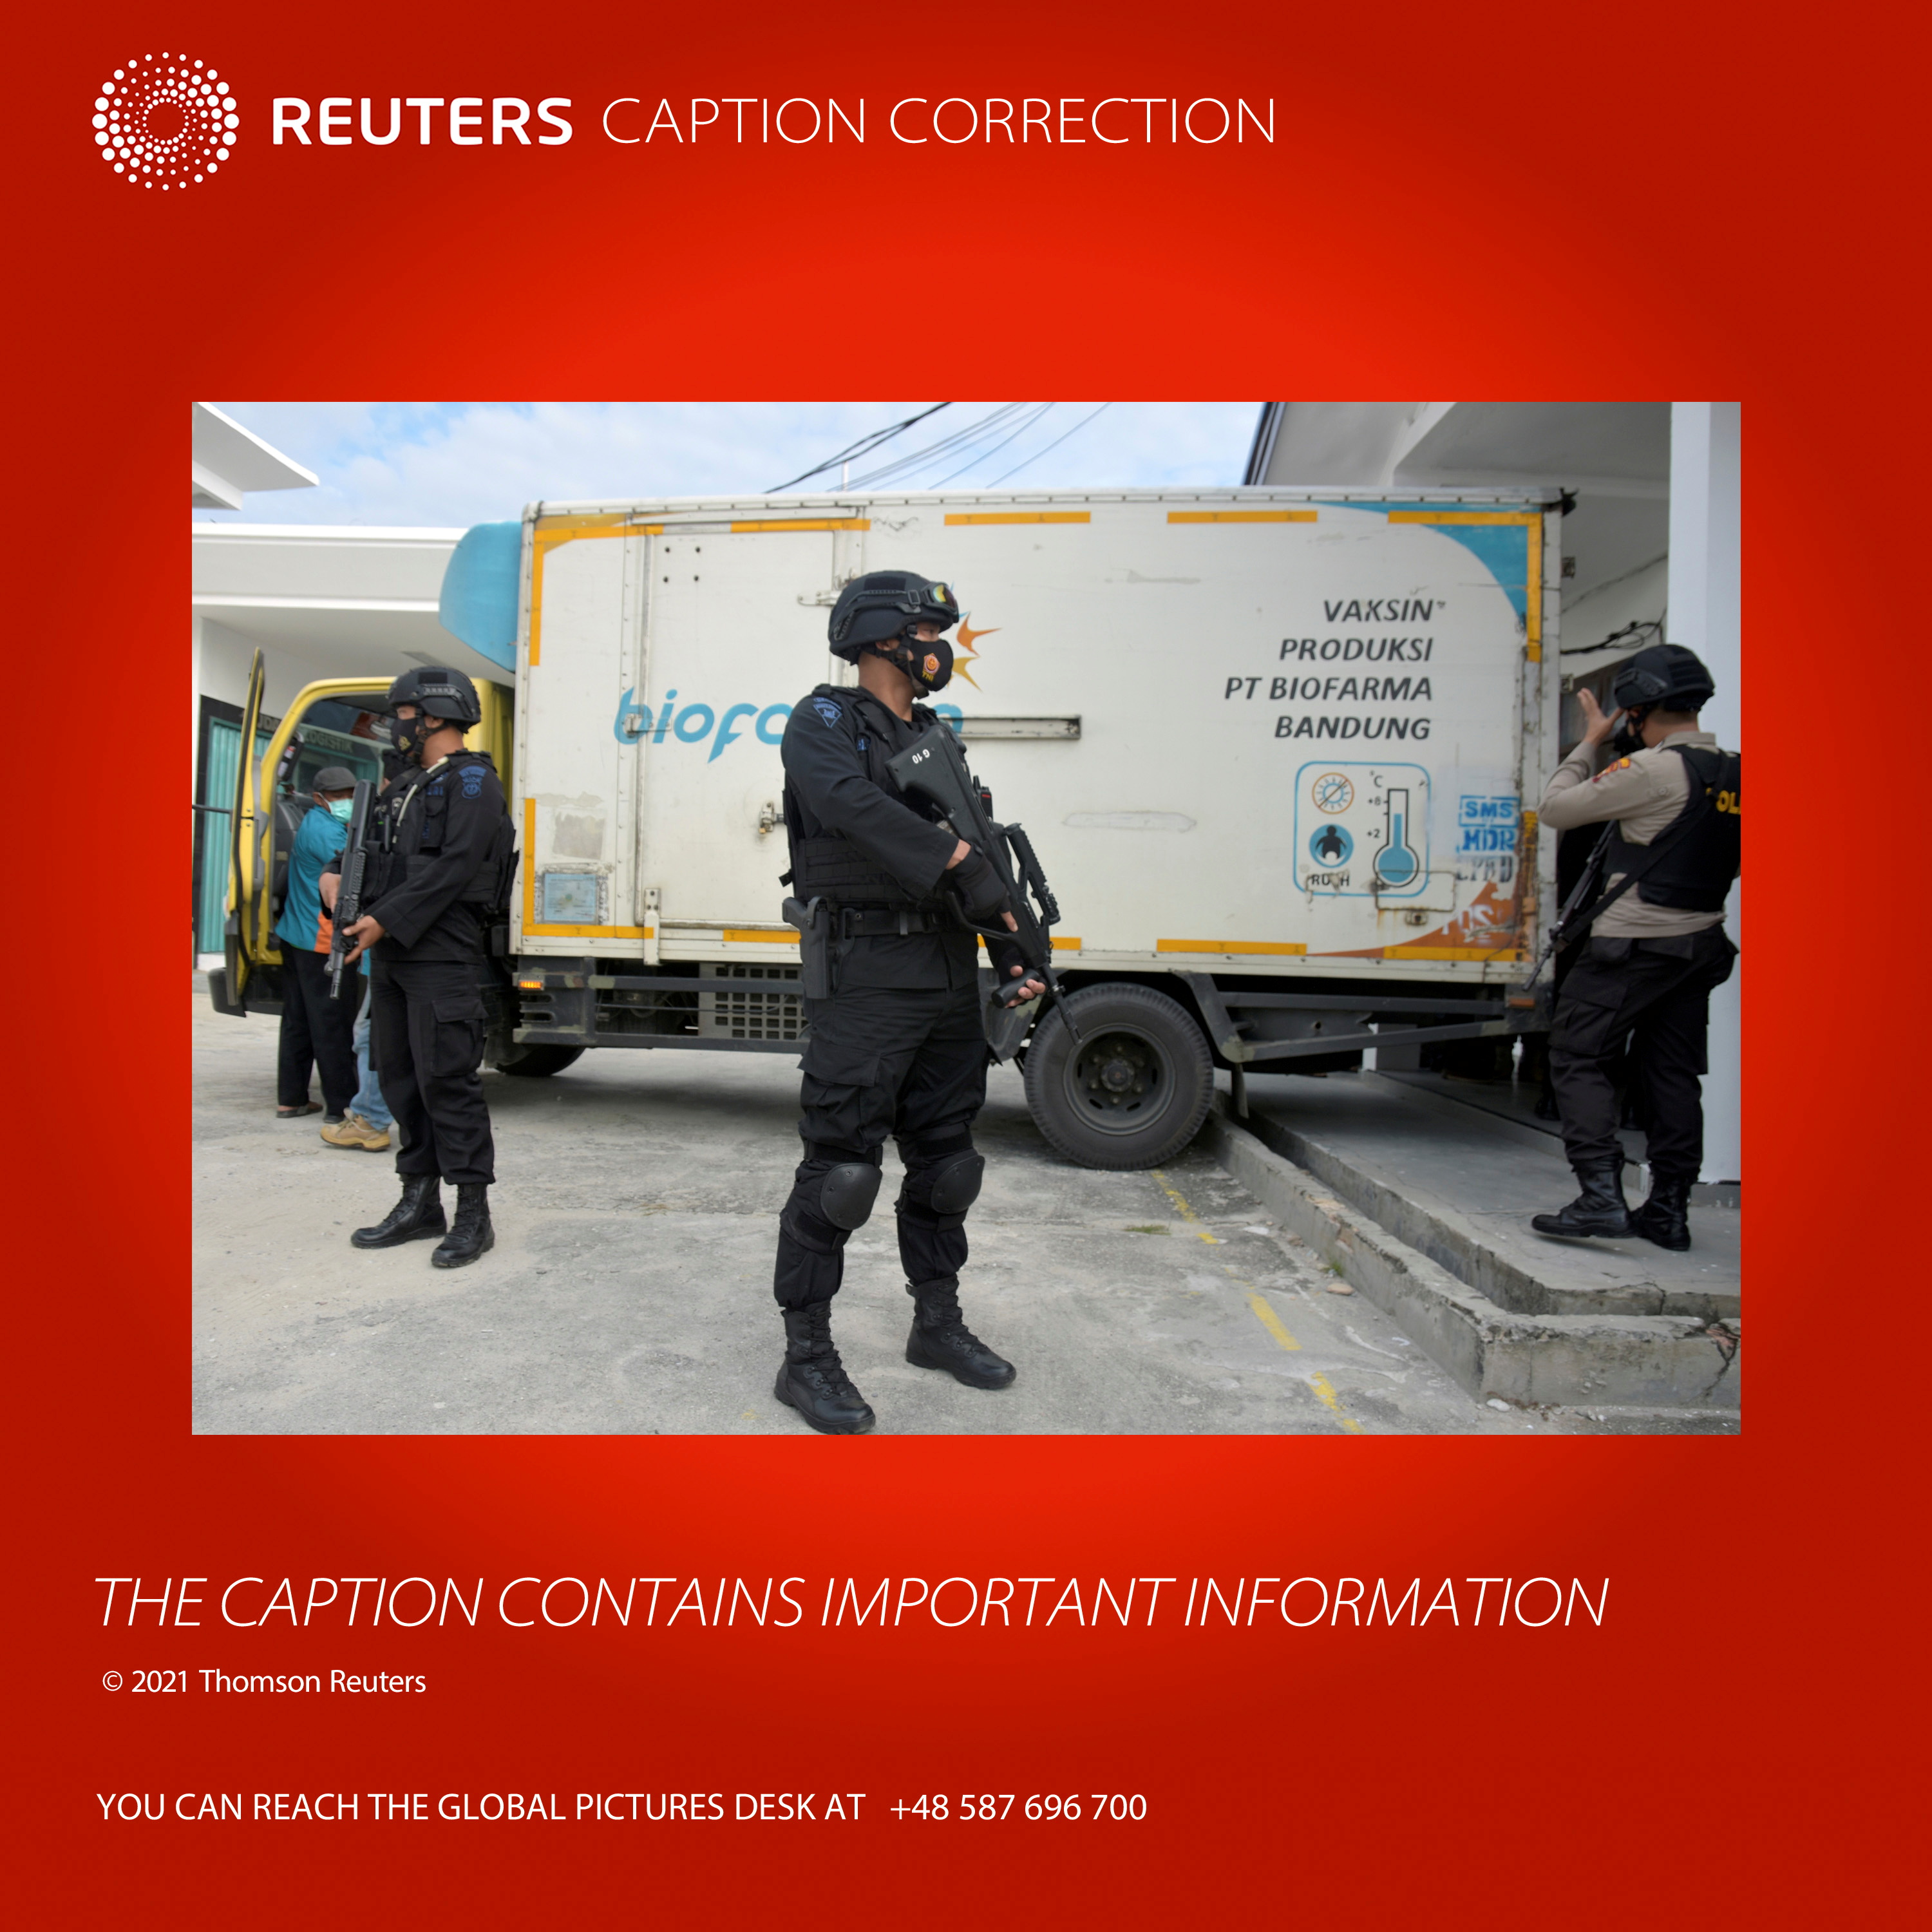 ATTENTION EDITORS - CAPTION CORRECTION FOR RC2F1L9LYIW2. WE ARE SORRY FOR ANY INCONVENIENCE CAUSED. REUTERS. REFILE - CORRECTING BYLINE   Armed police officers stand guard next to a truck containing Sinovac's vaccine for coronavirus disease (COVID-19) during its distribution in Pekanbaru, Riau province, Indonesia, January 5, 2021 in this photo taken by Antara Foto.  Antara Foto/FB Anggoro via REUTERS   ATTENTION EDITORS - THIS IMAGE WAS PROVIDED BY A THIRD PARTY. MANDATORY CREDIT. INDONESIA OUT.  TEMPLATE OUT